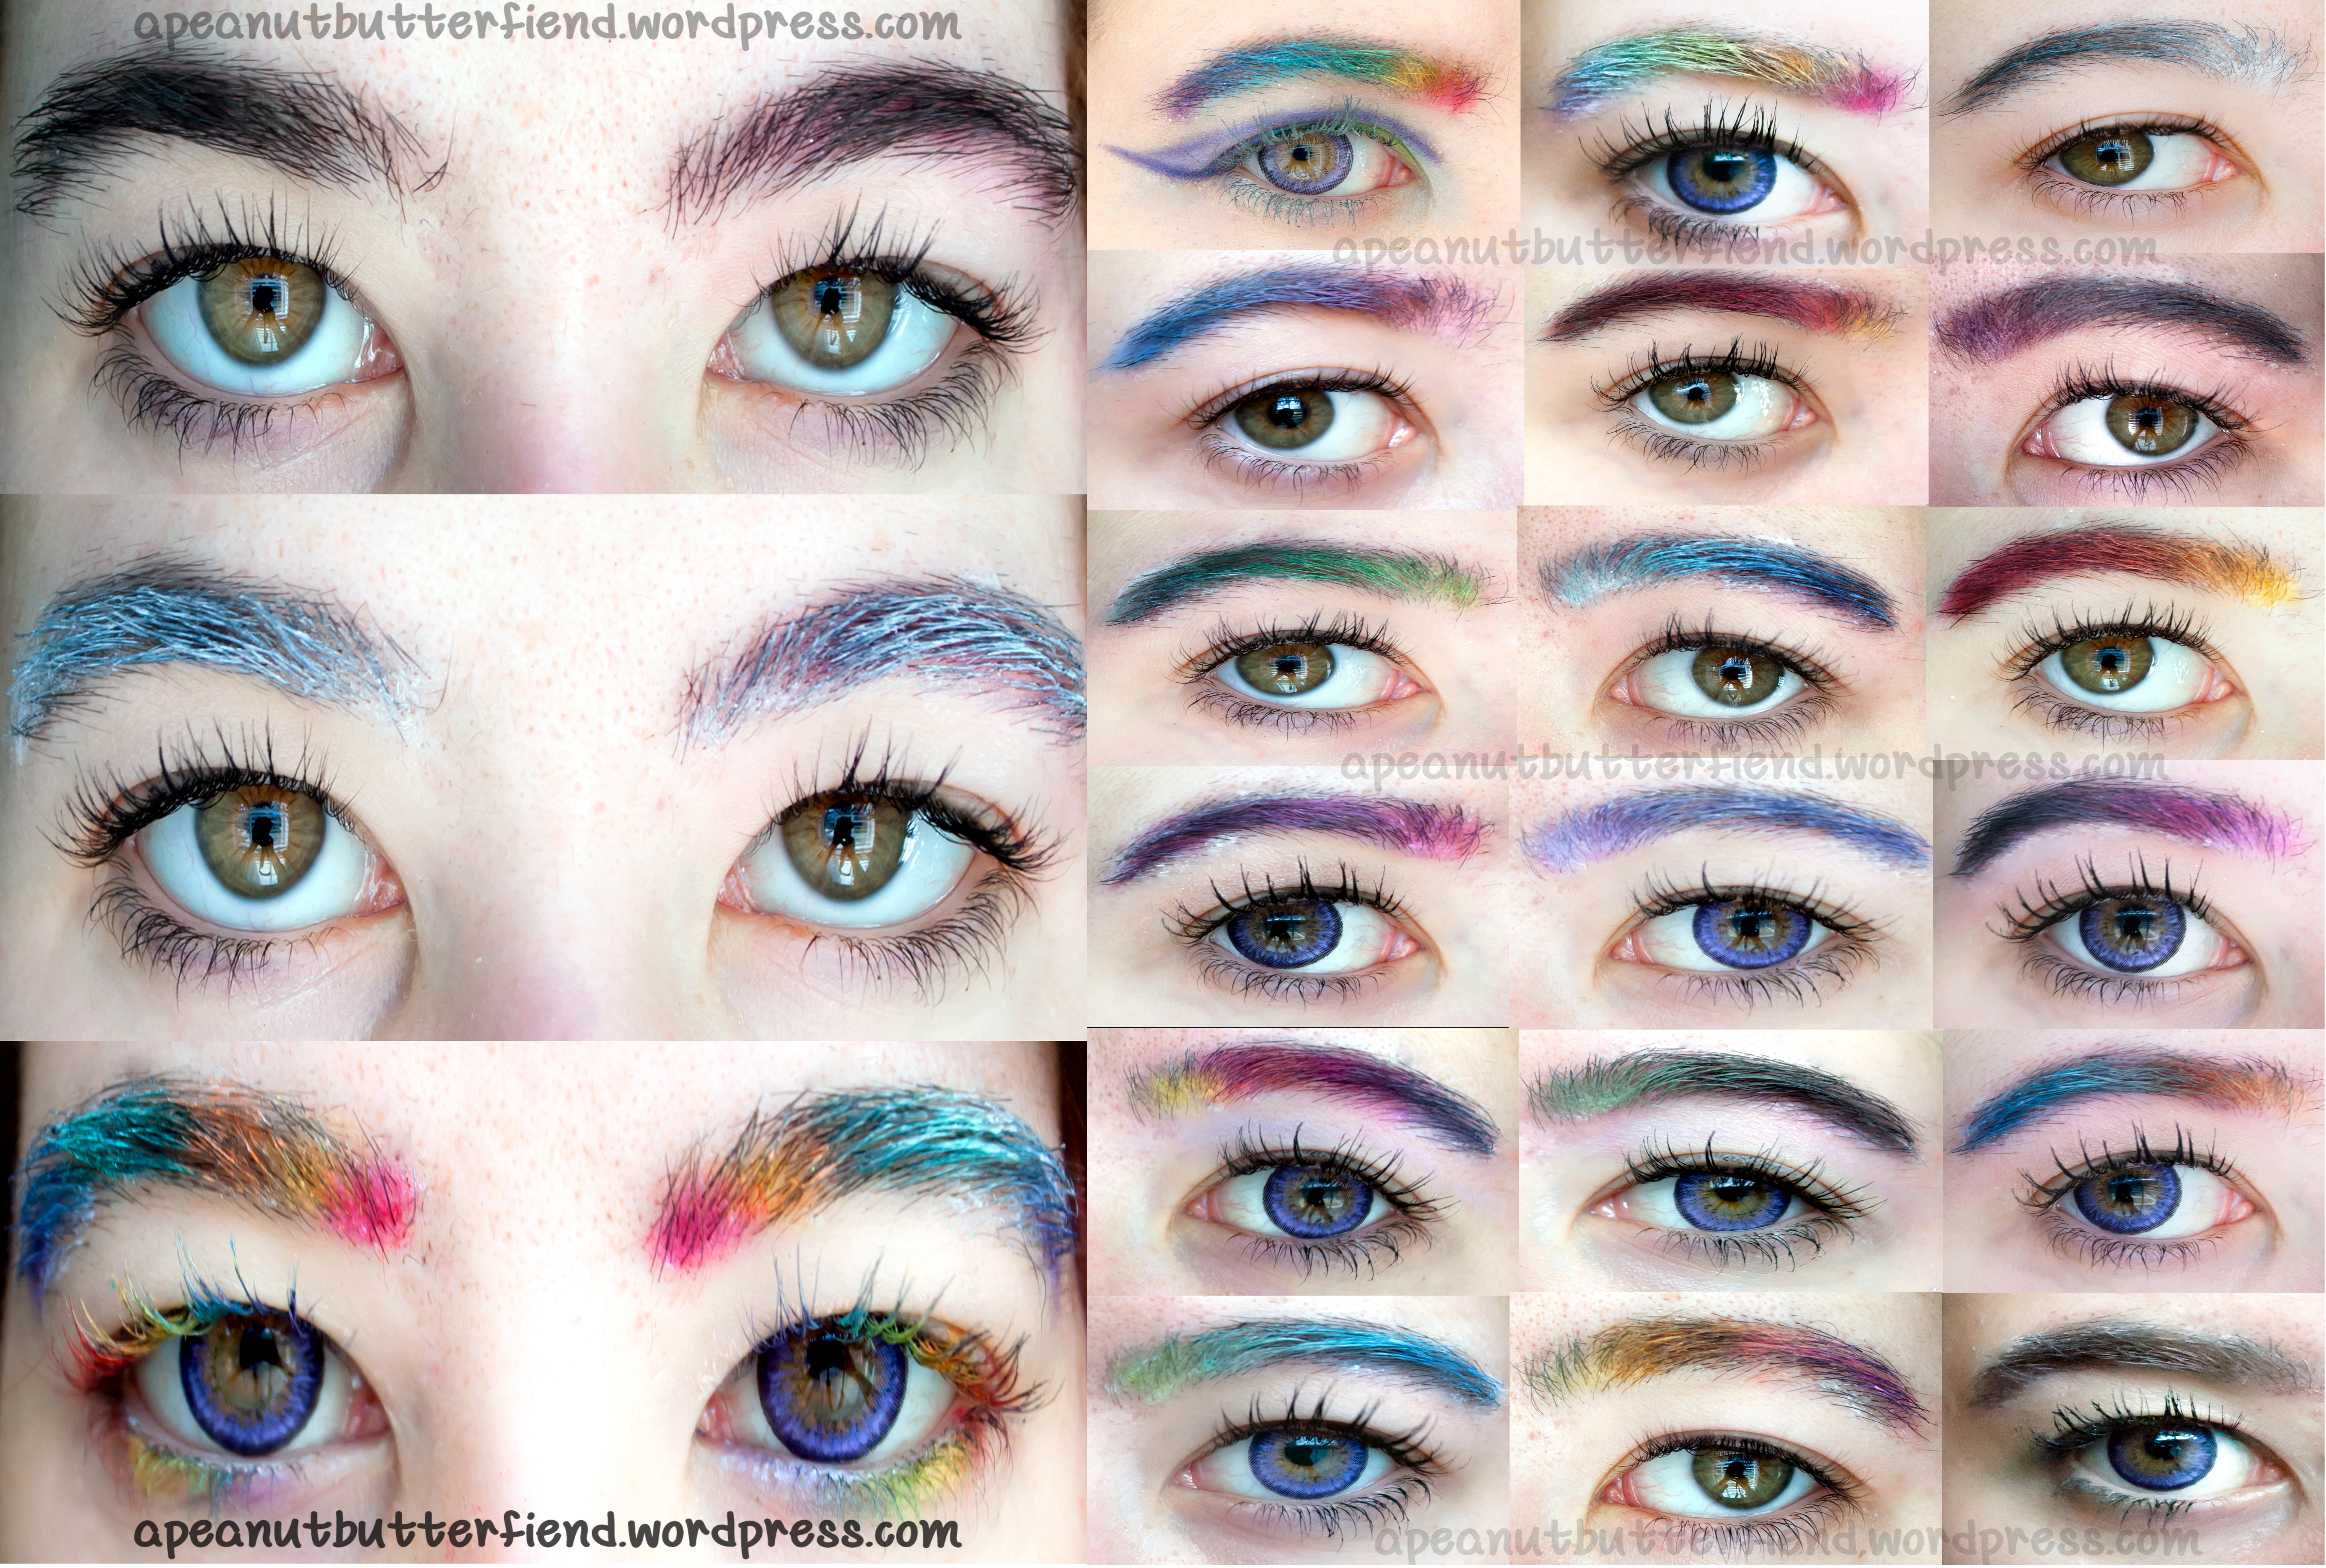 How To Color Eyebrows Apeanutbutterfiend